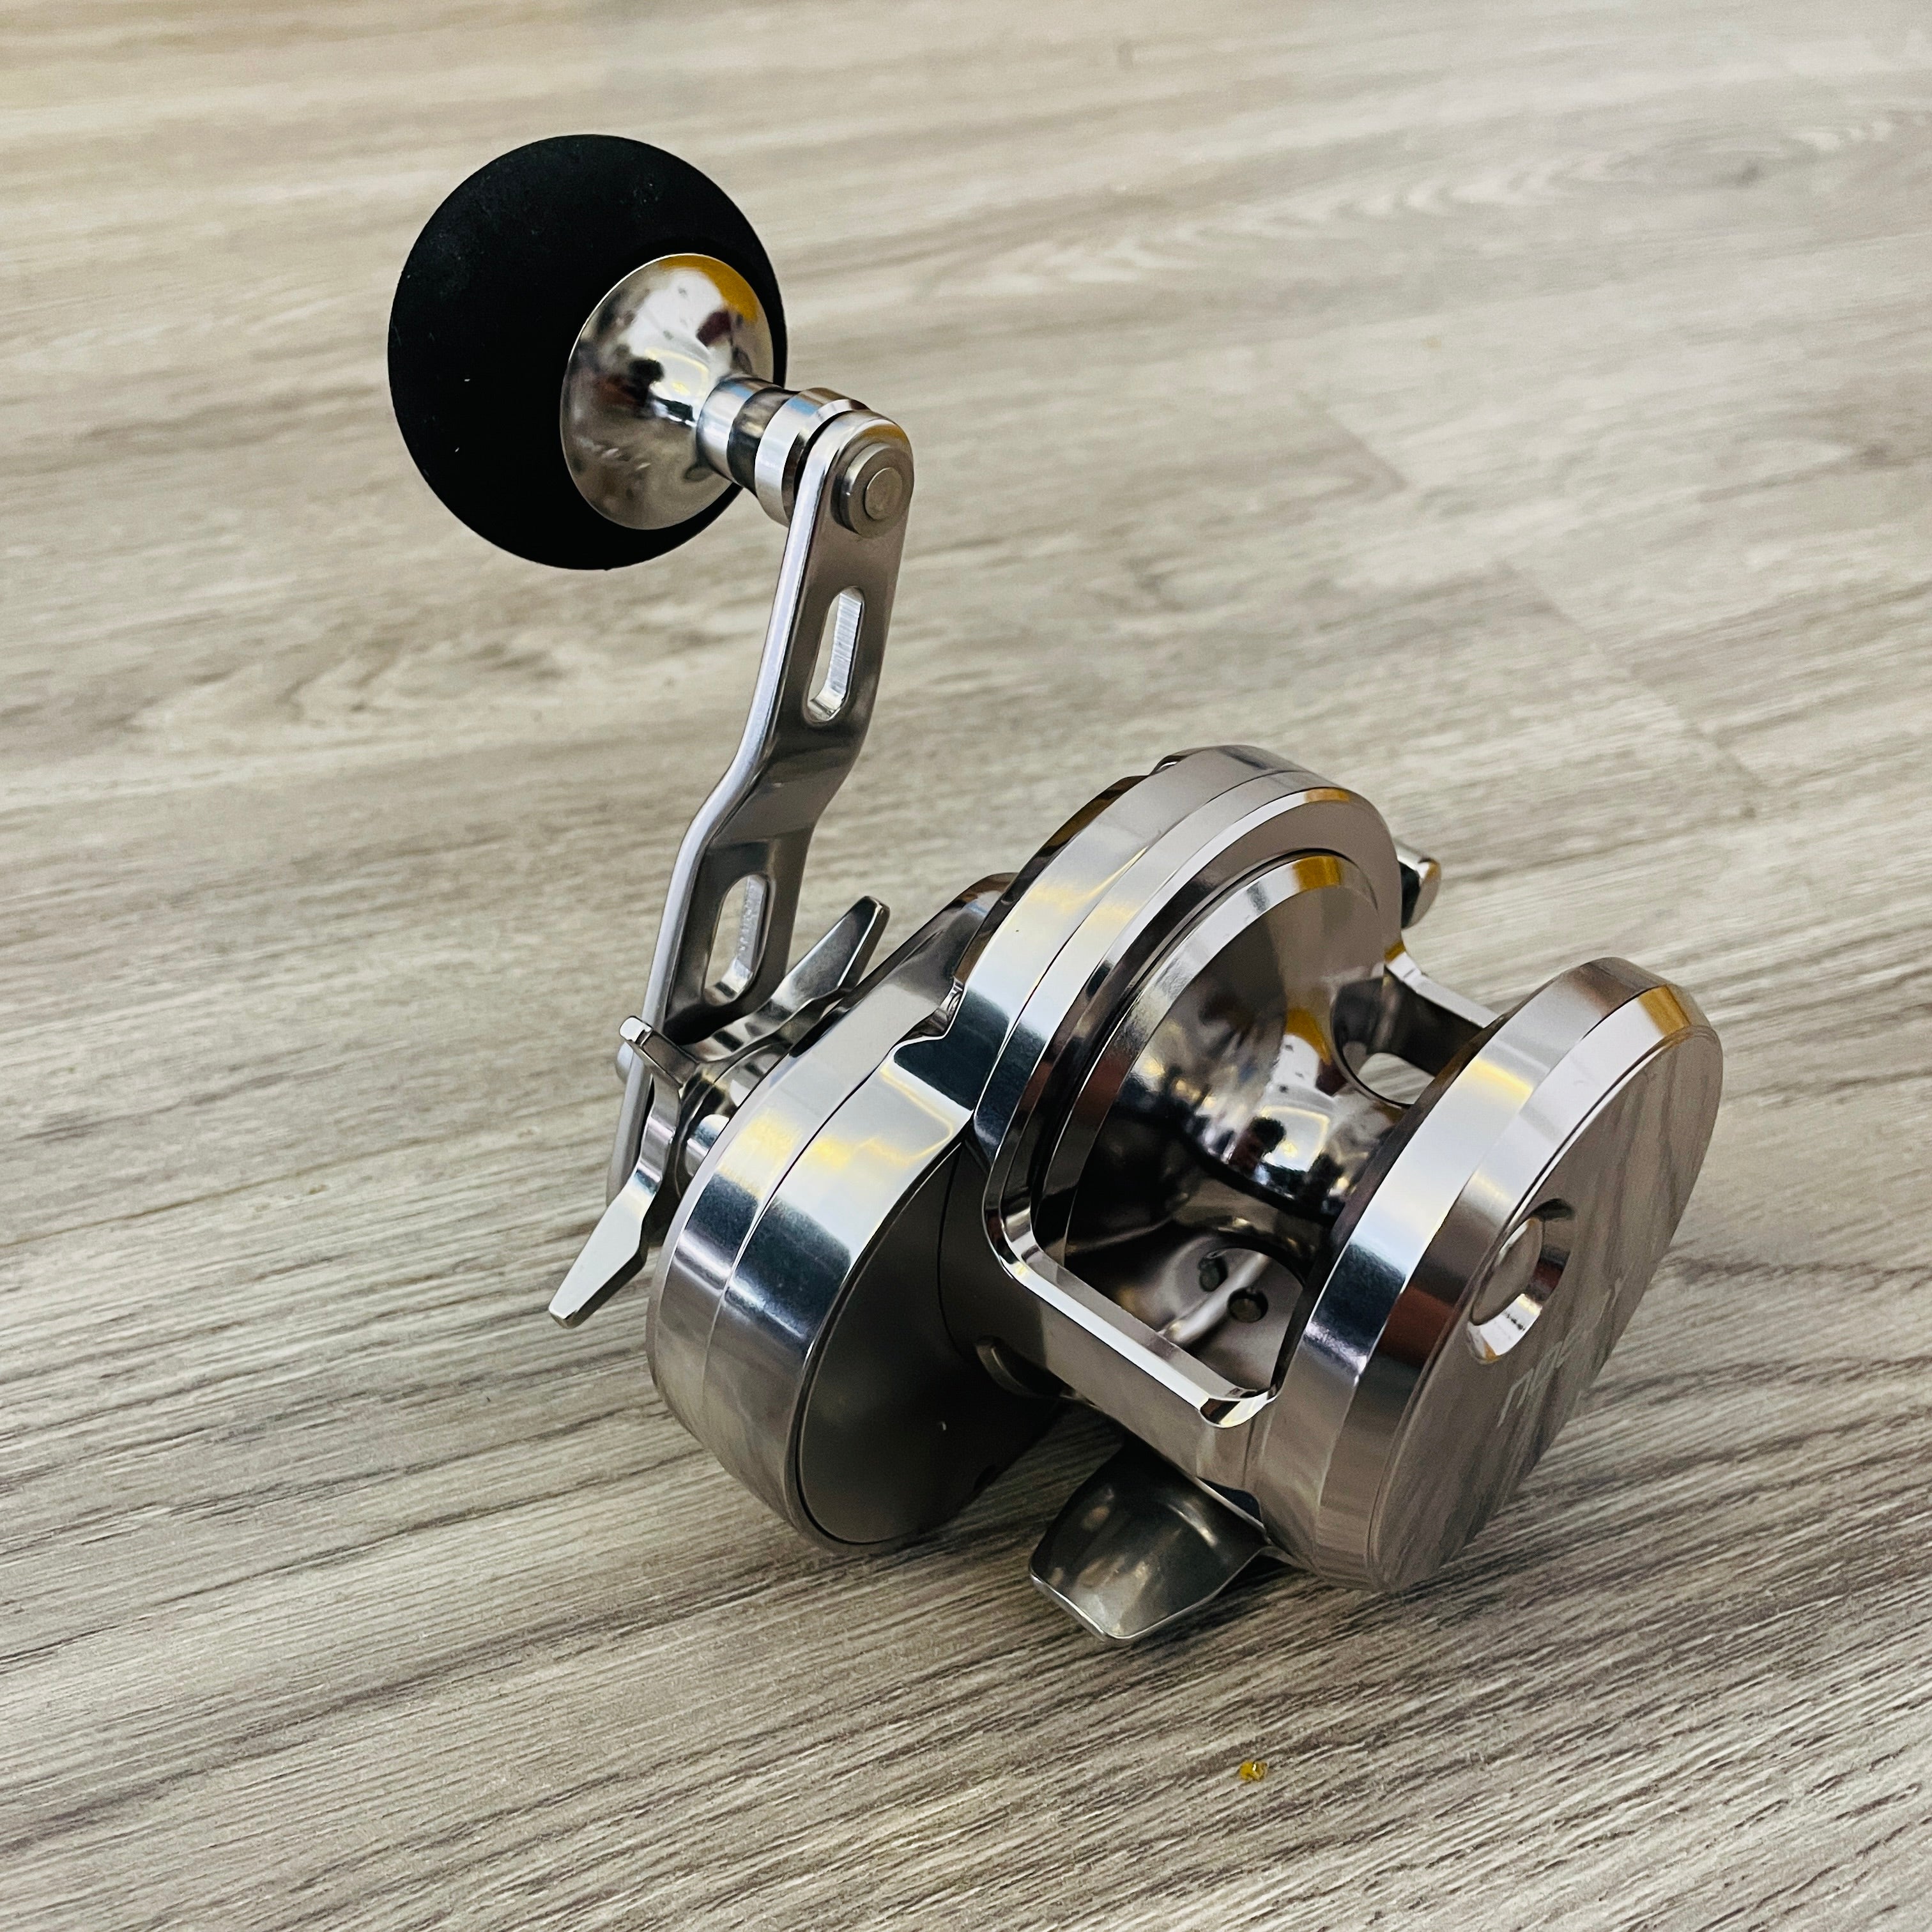 NOEBY Jigging Fishing reel 1500/2500 (left and right hand) – Jigs